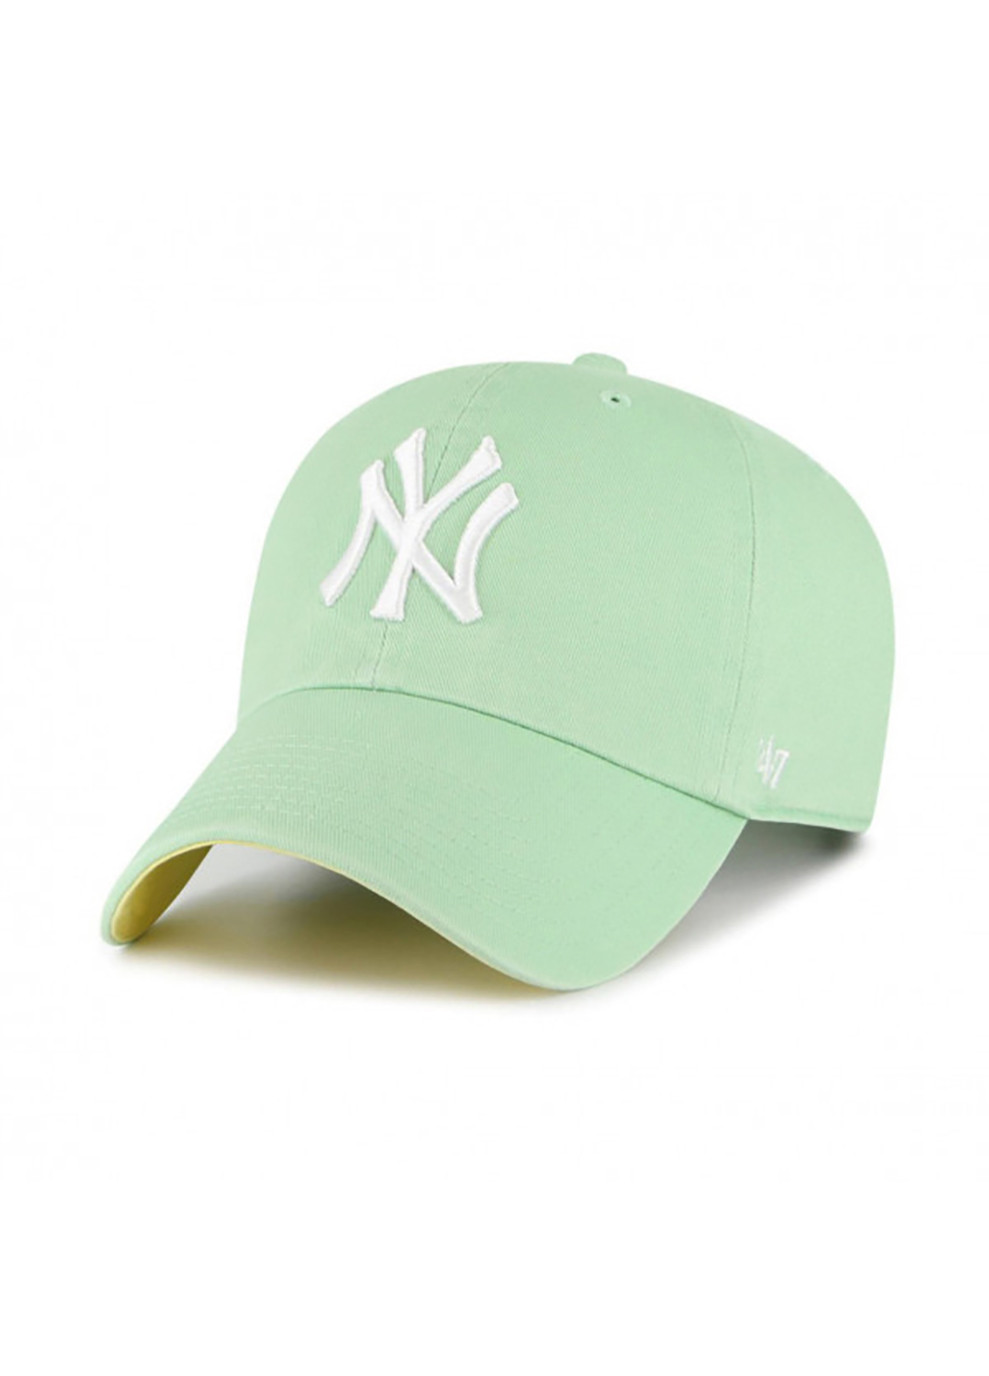 Кепка NY YANKEES BALLPARK One Size Yellow/mint 47 Brand (258132737)